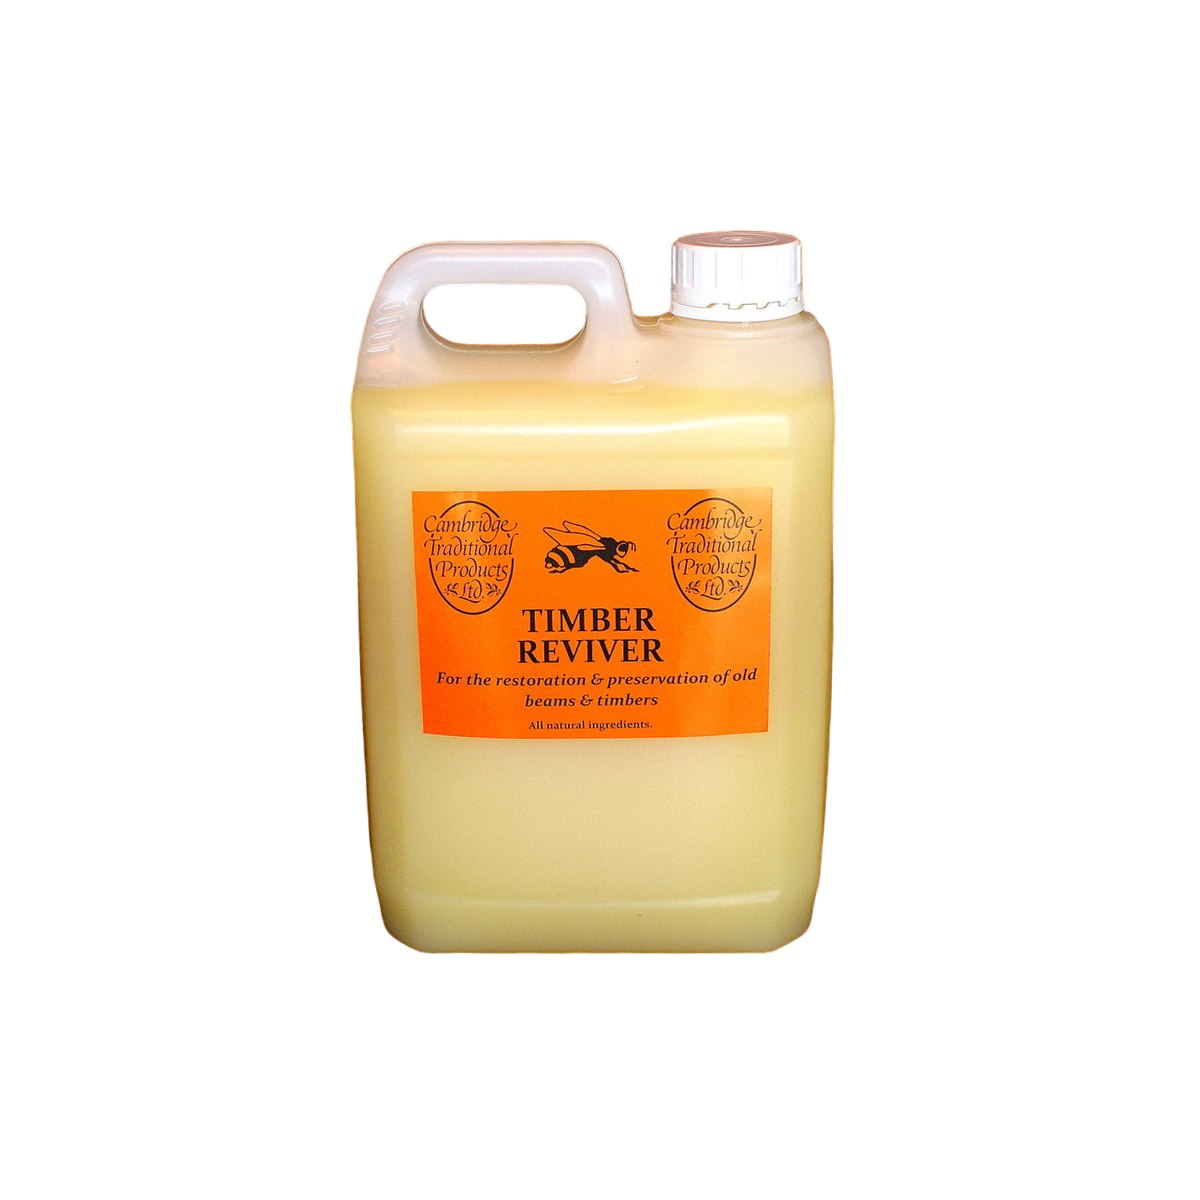 Cambridge Traditional Products Timber Reviver 2.5 Litre